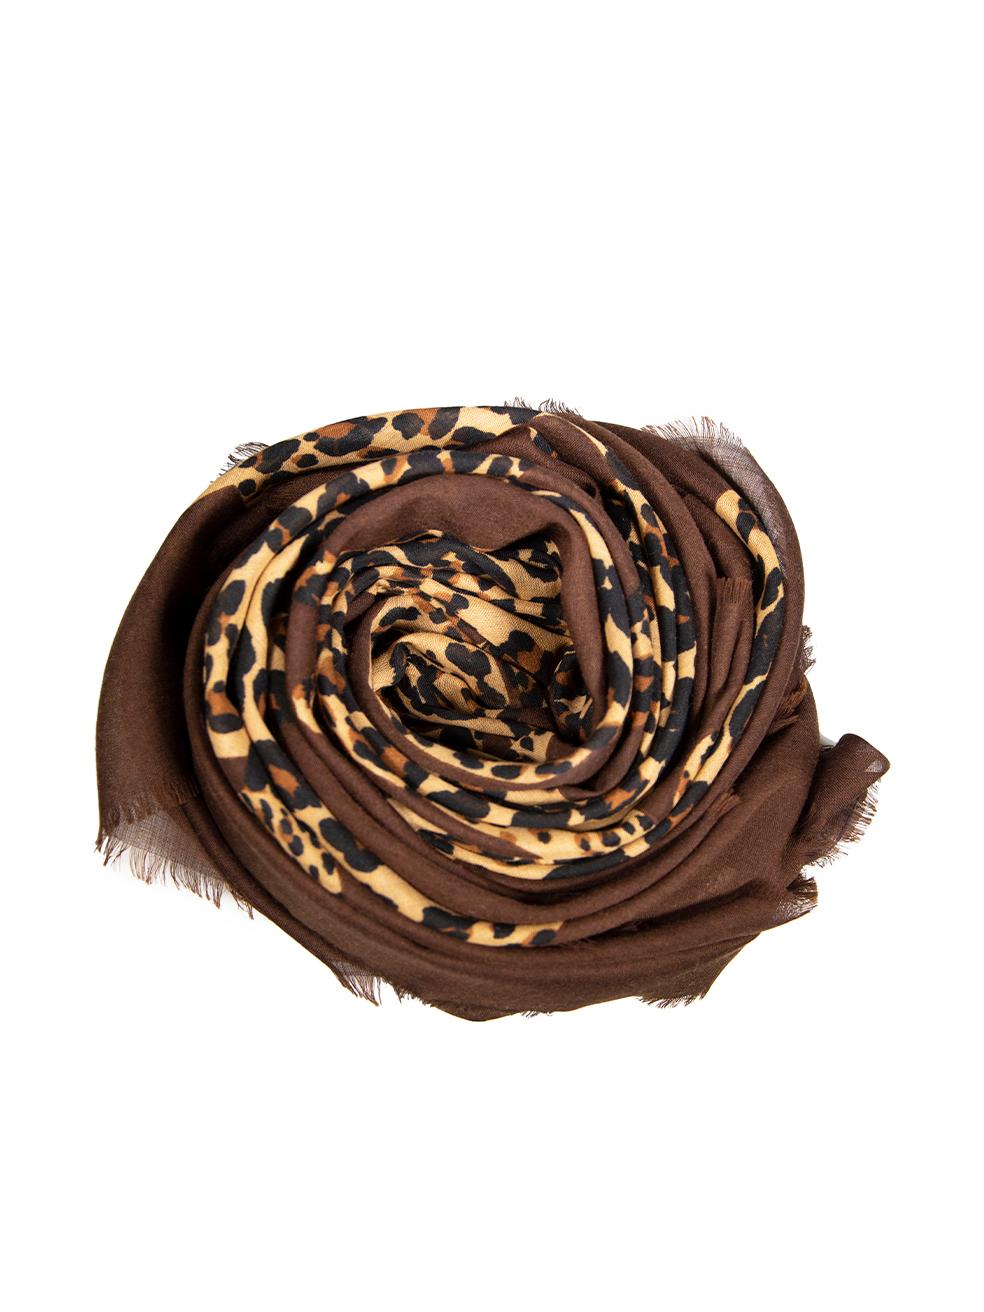 CONDITION is Very good. Minimal wear to scarf is evident. Minimal wear to the top-left with a small hole to the weave on this used Yves Saint Laurent designer resale item.
 
 Details
 Vintage
 Brown
 Wool
 Square scarf
 Leopard print pattern
 Frayed